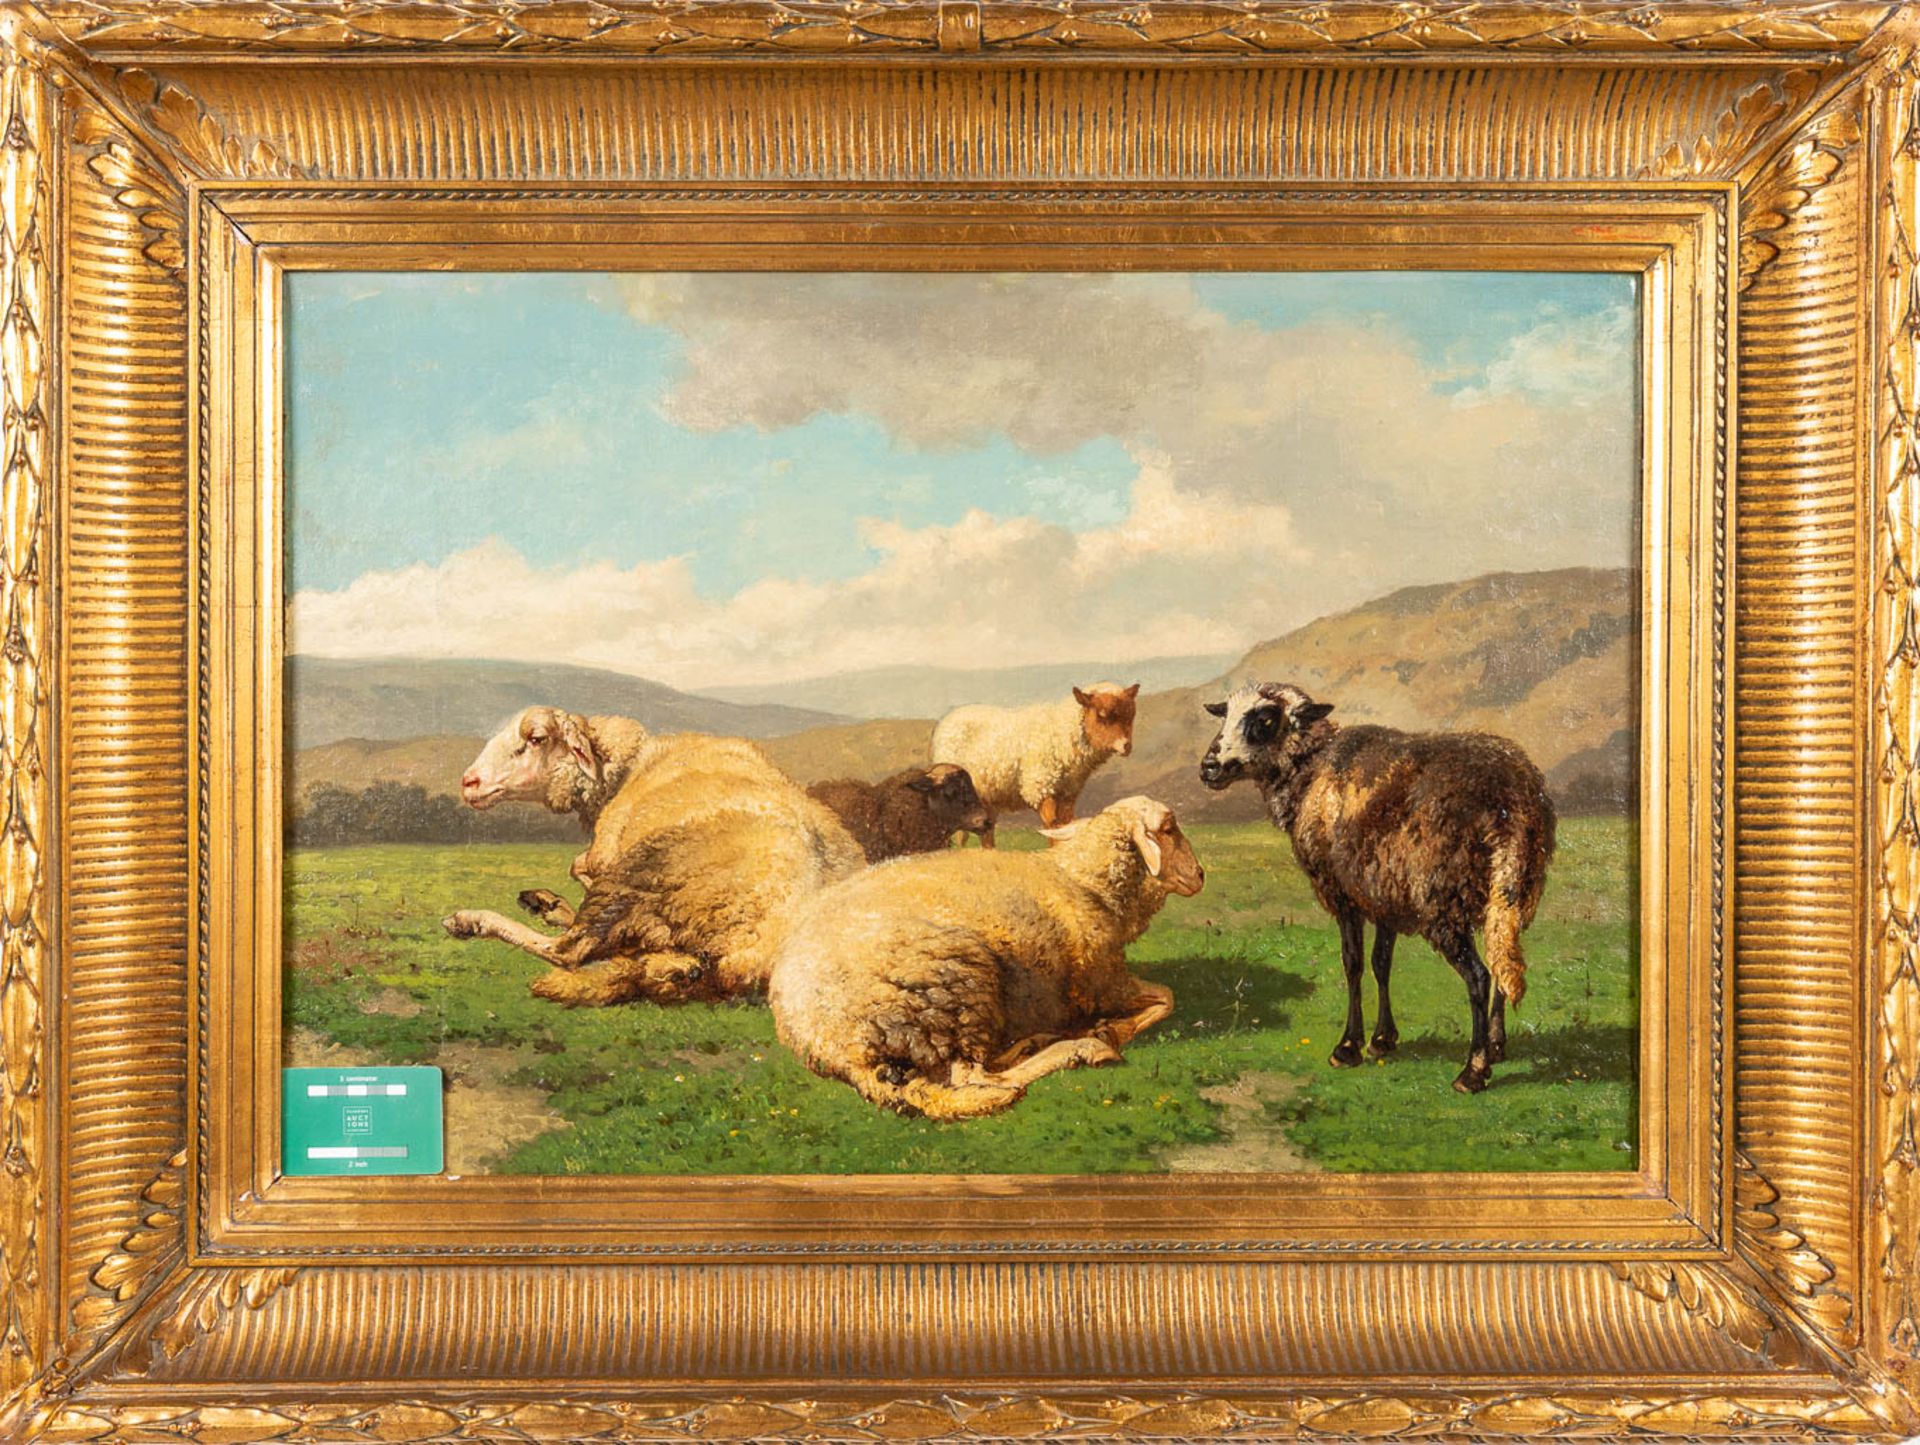 Louis ROBBE (1806-1887) 'The Black Sheep' a painting, oil on canvas. (W: 70 x H: 46 cm) - Image 7 of 7